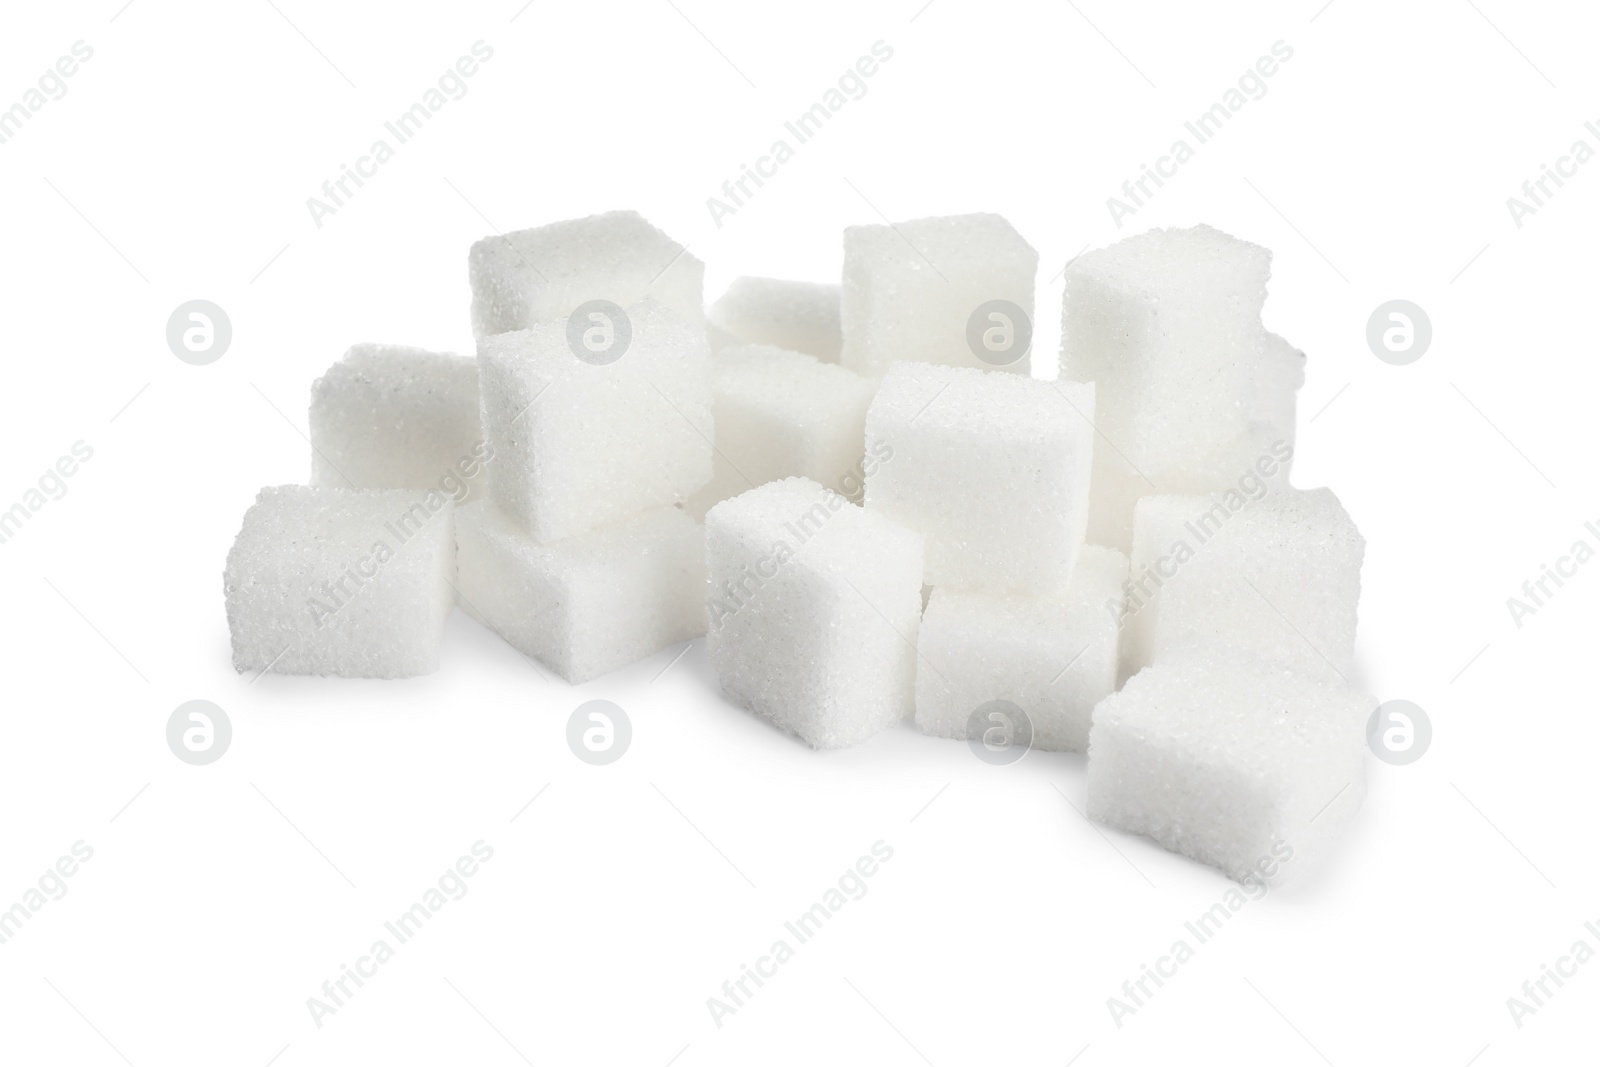 Photo of Pile of refined sugar cubes on white background